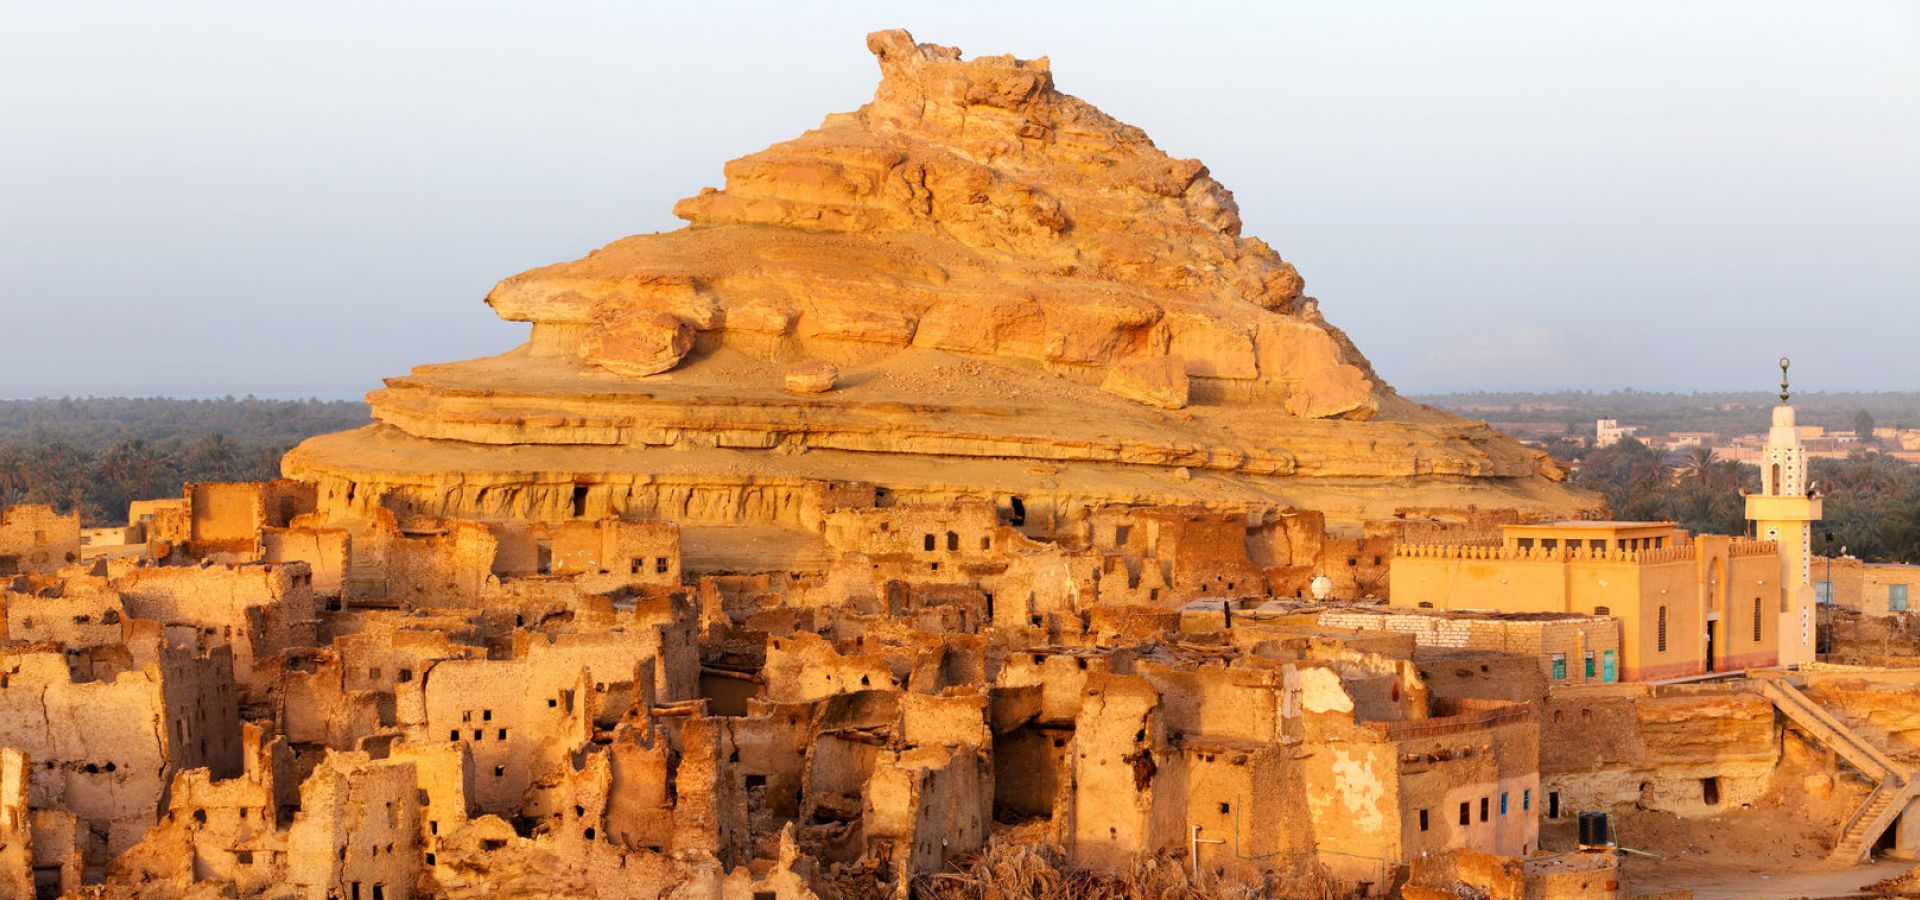 Siwa Oasis and Al Alamein 4 days 3 nights tour from Alexandria